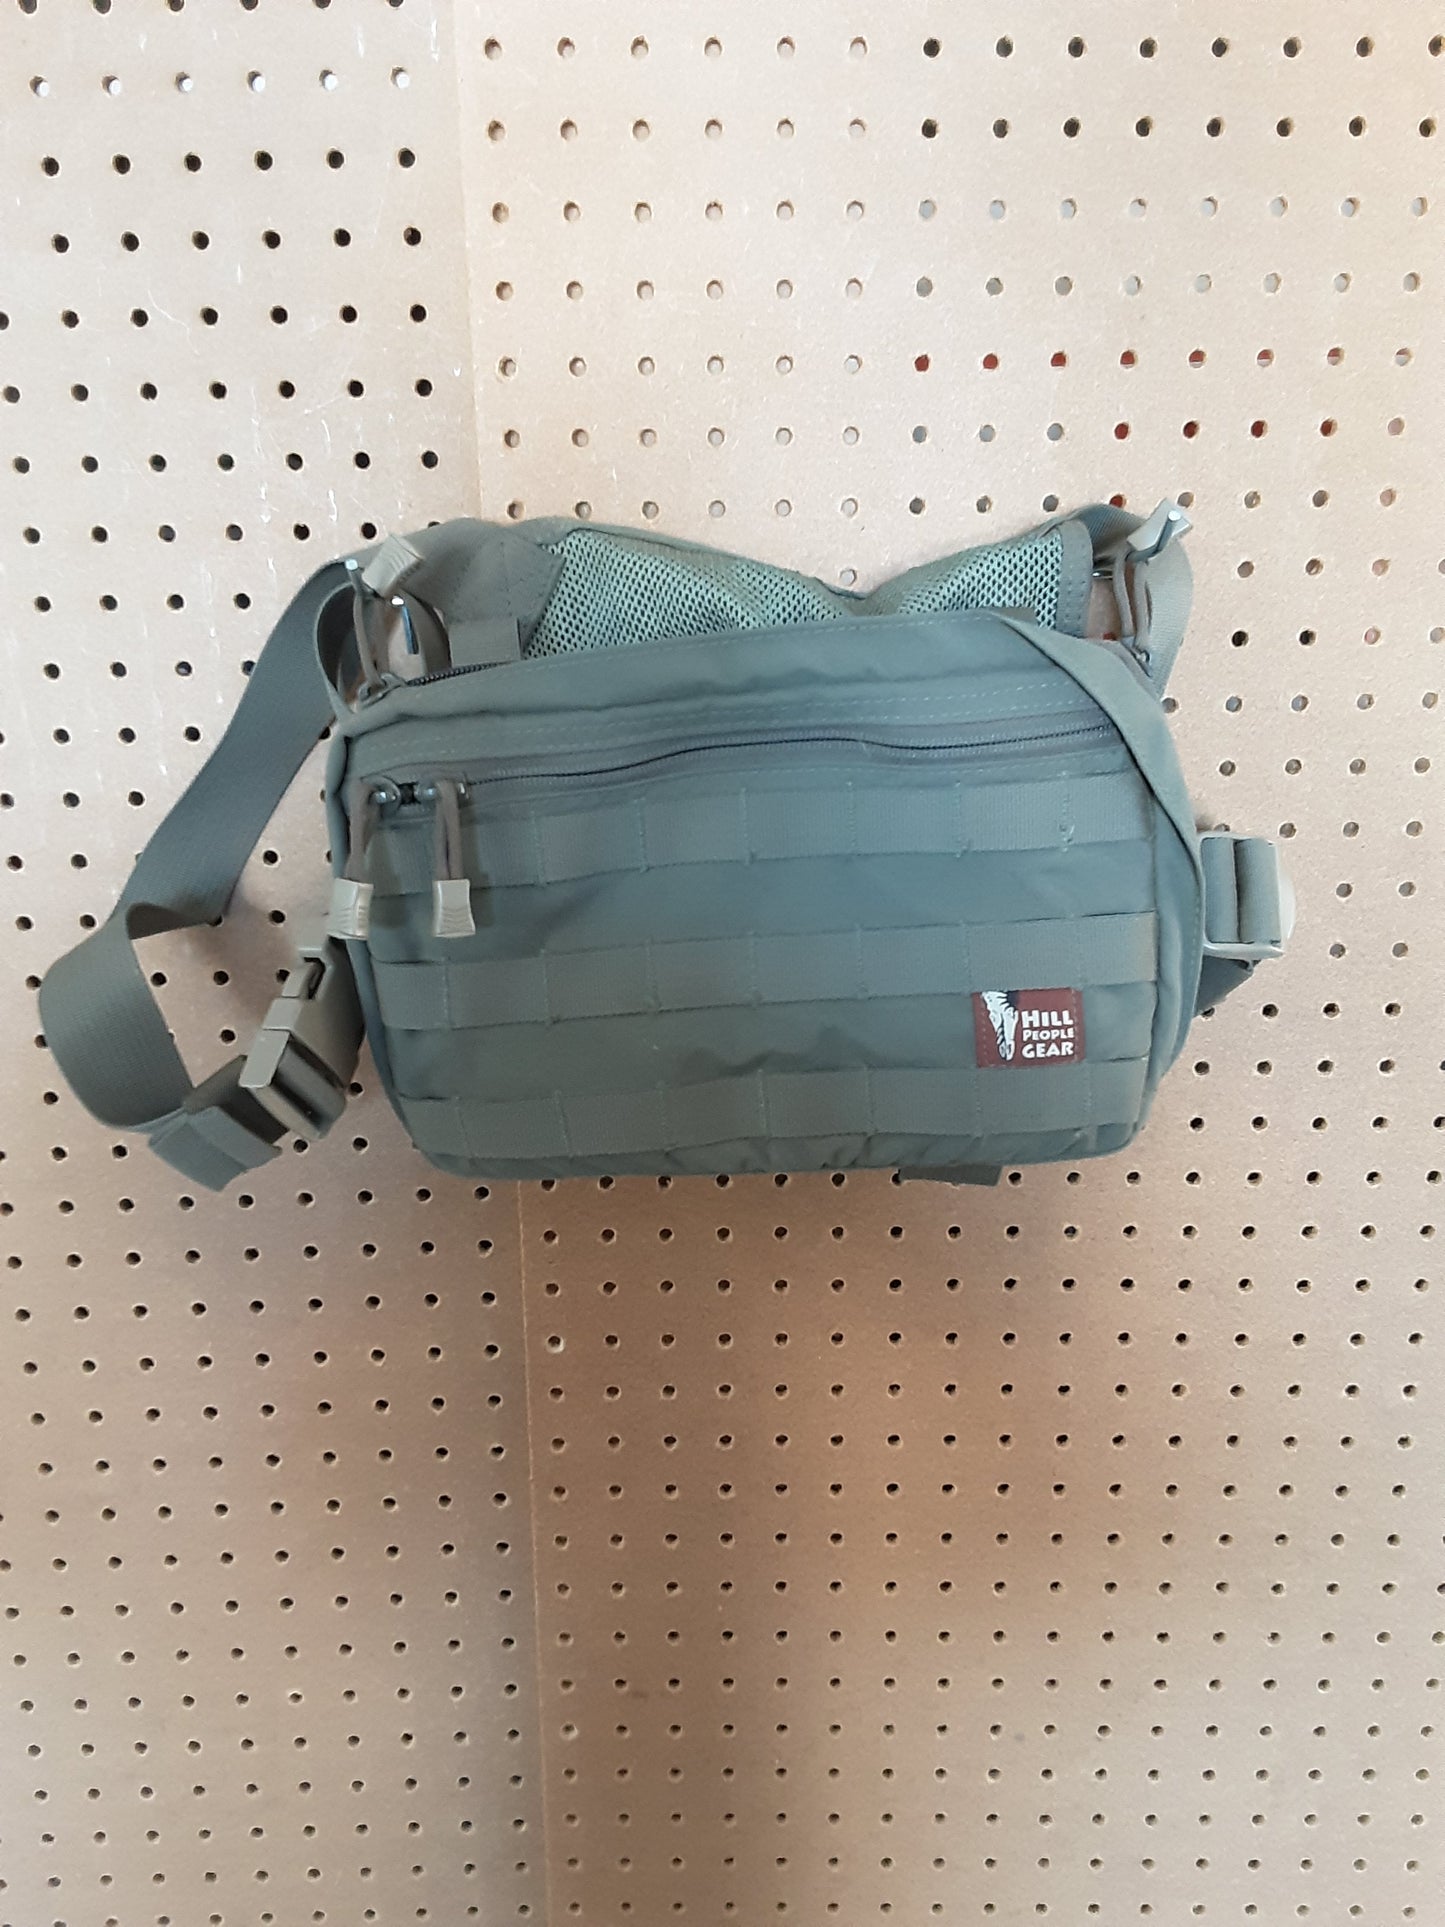 Hill people Gear chest pack. used